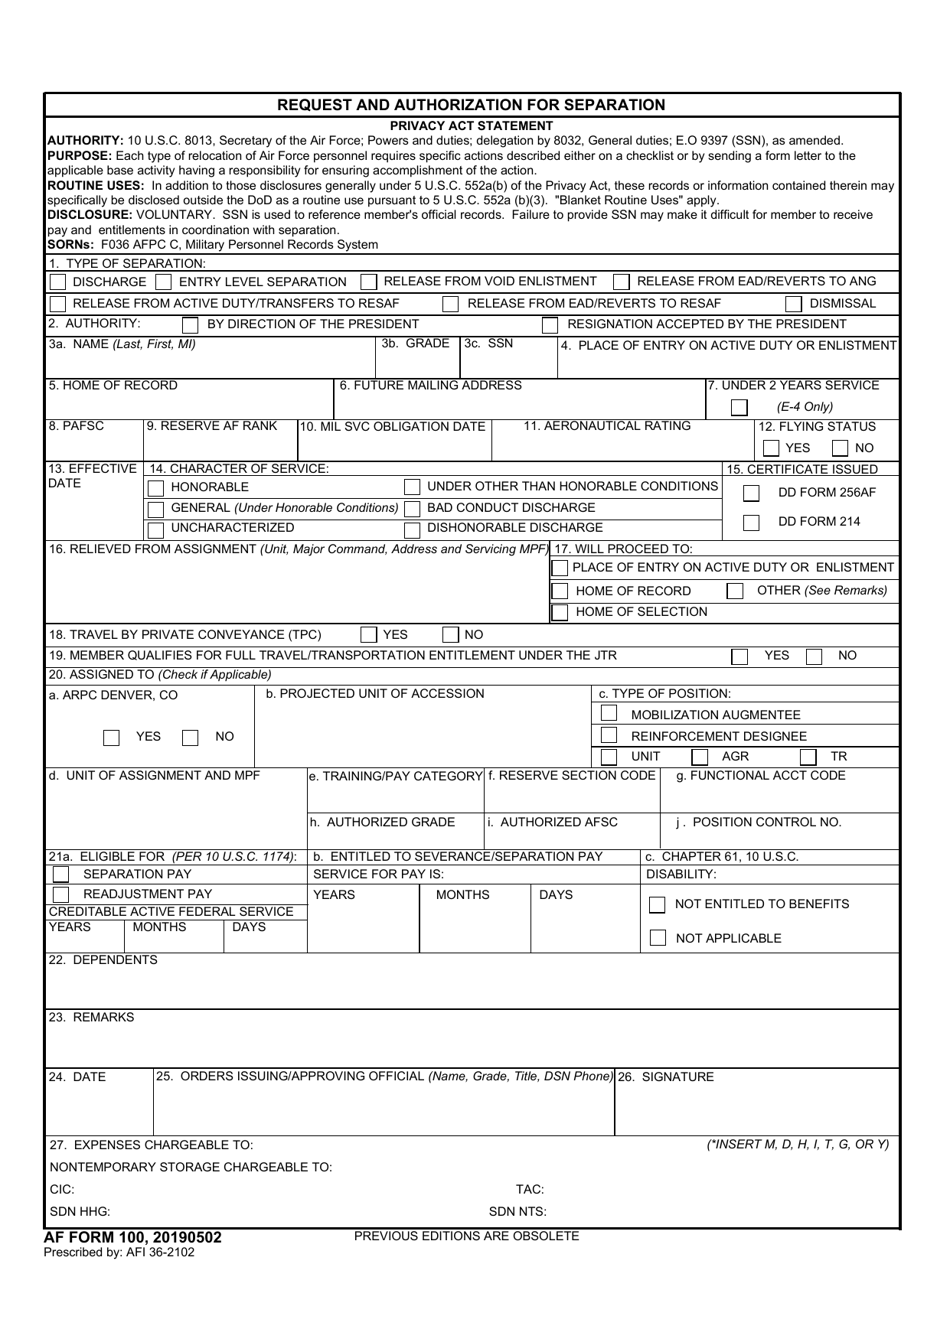 AF Form 100 Request and Authorization for Separation, Page 1